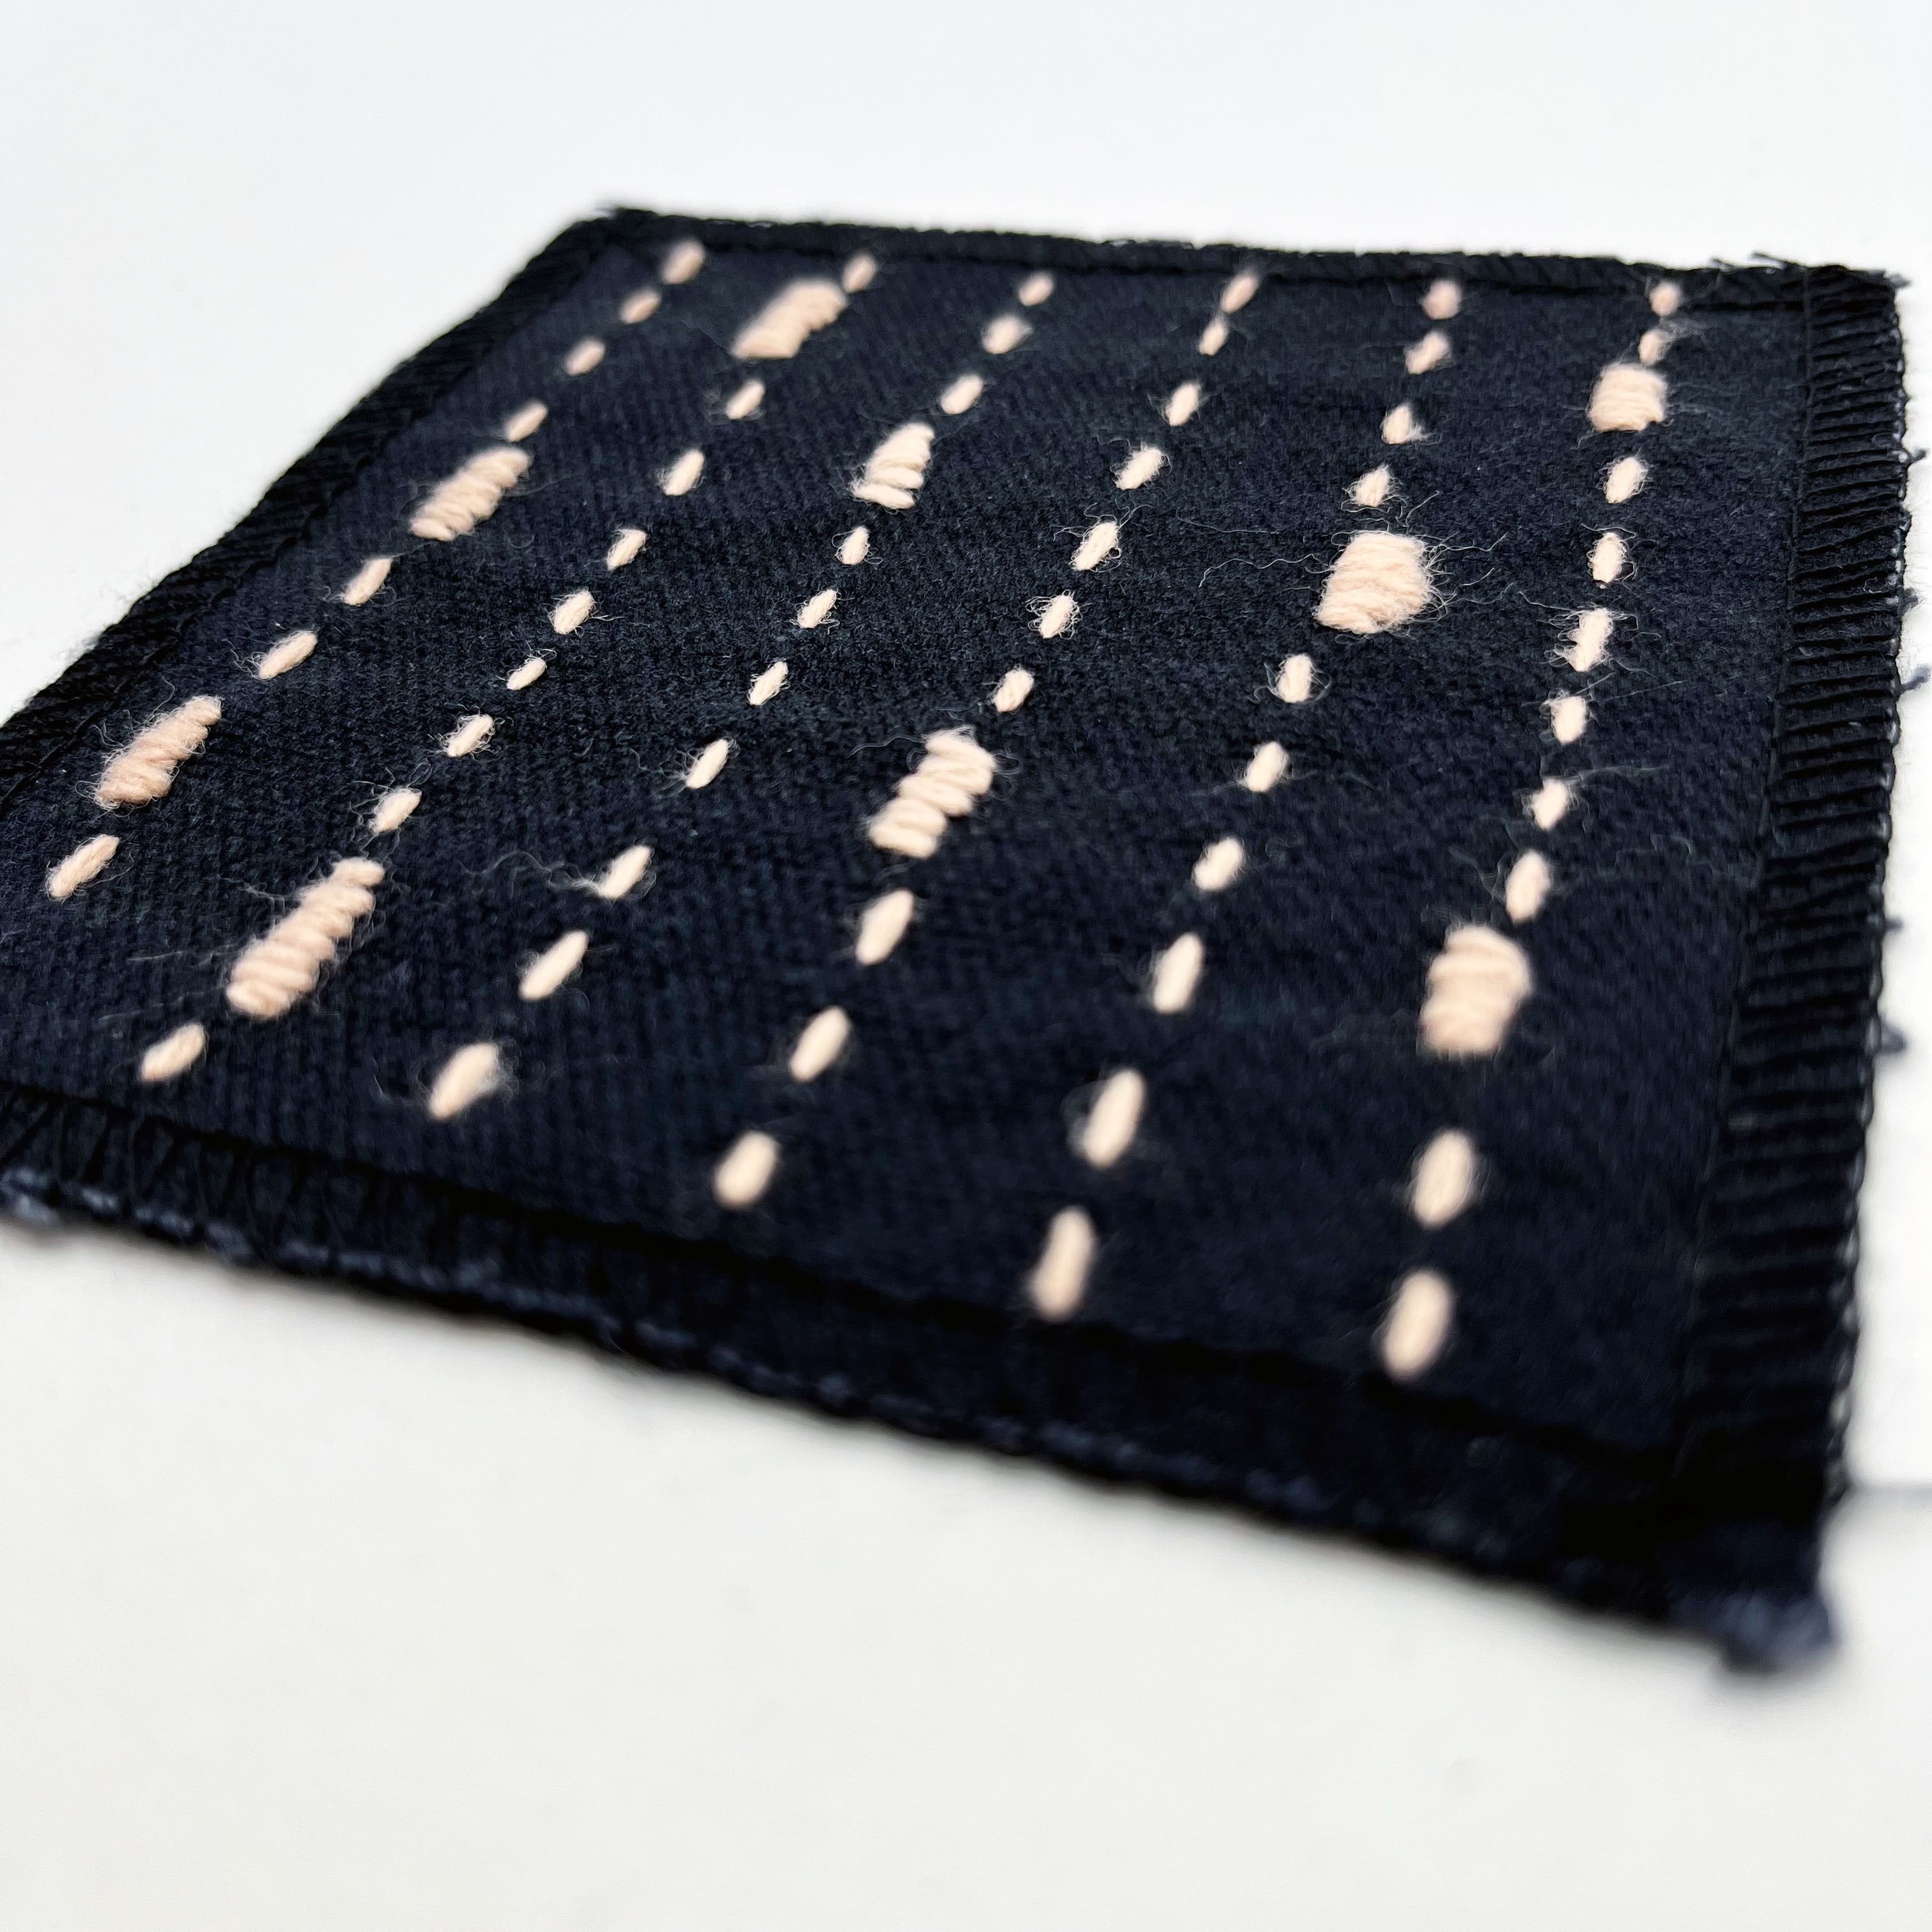 Square Patch with Embroidered Slubbed Lines